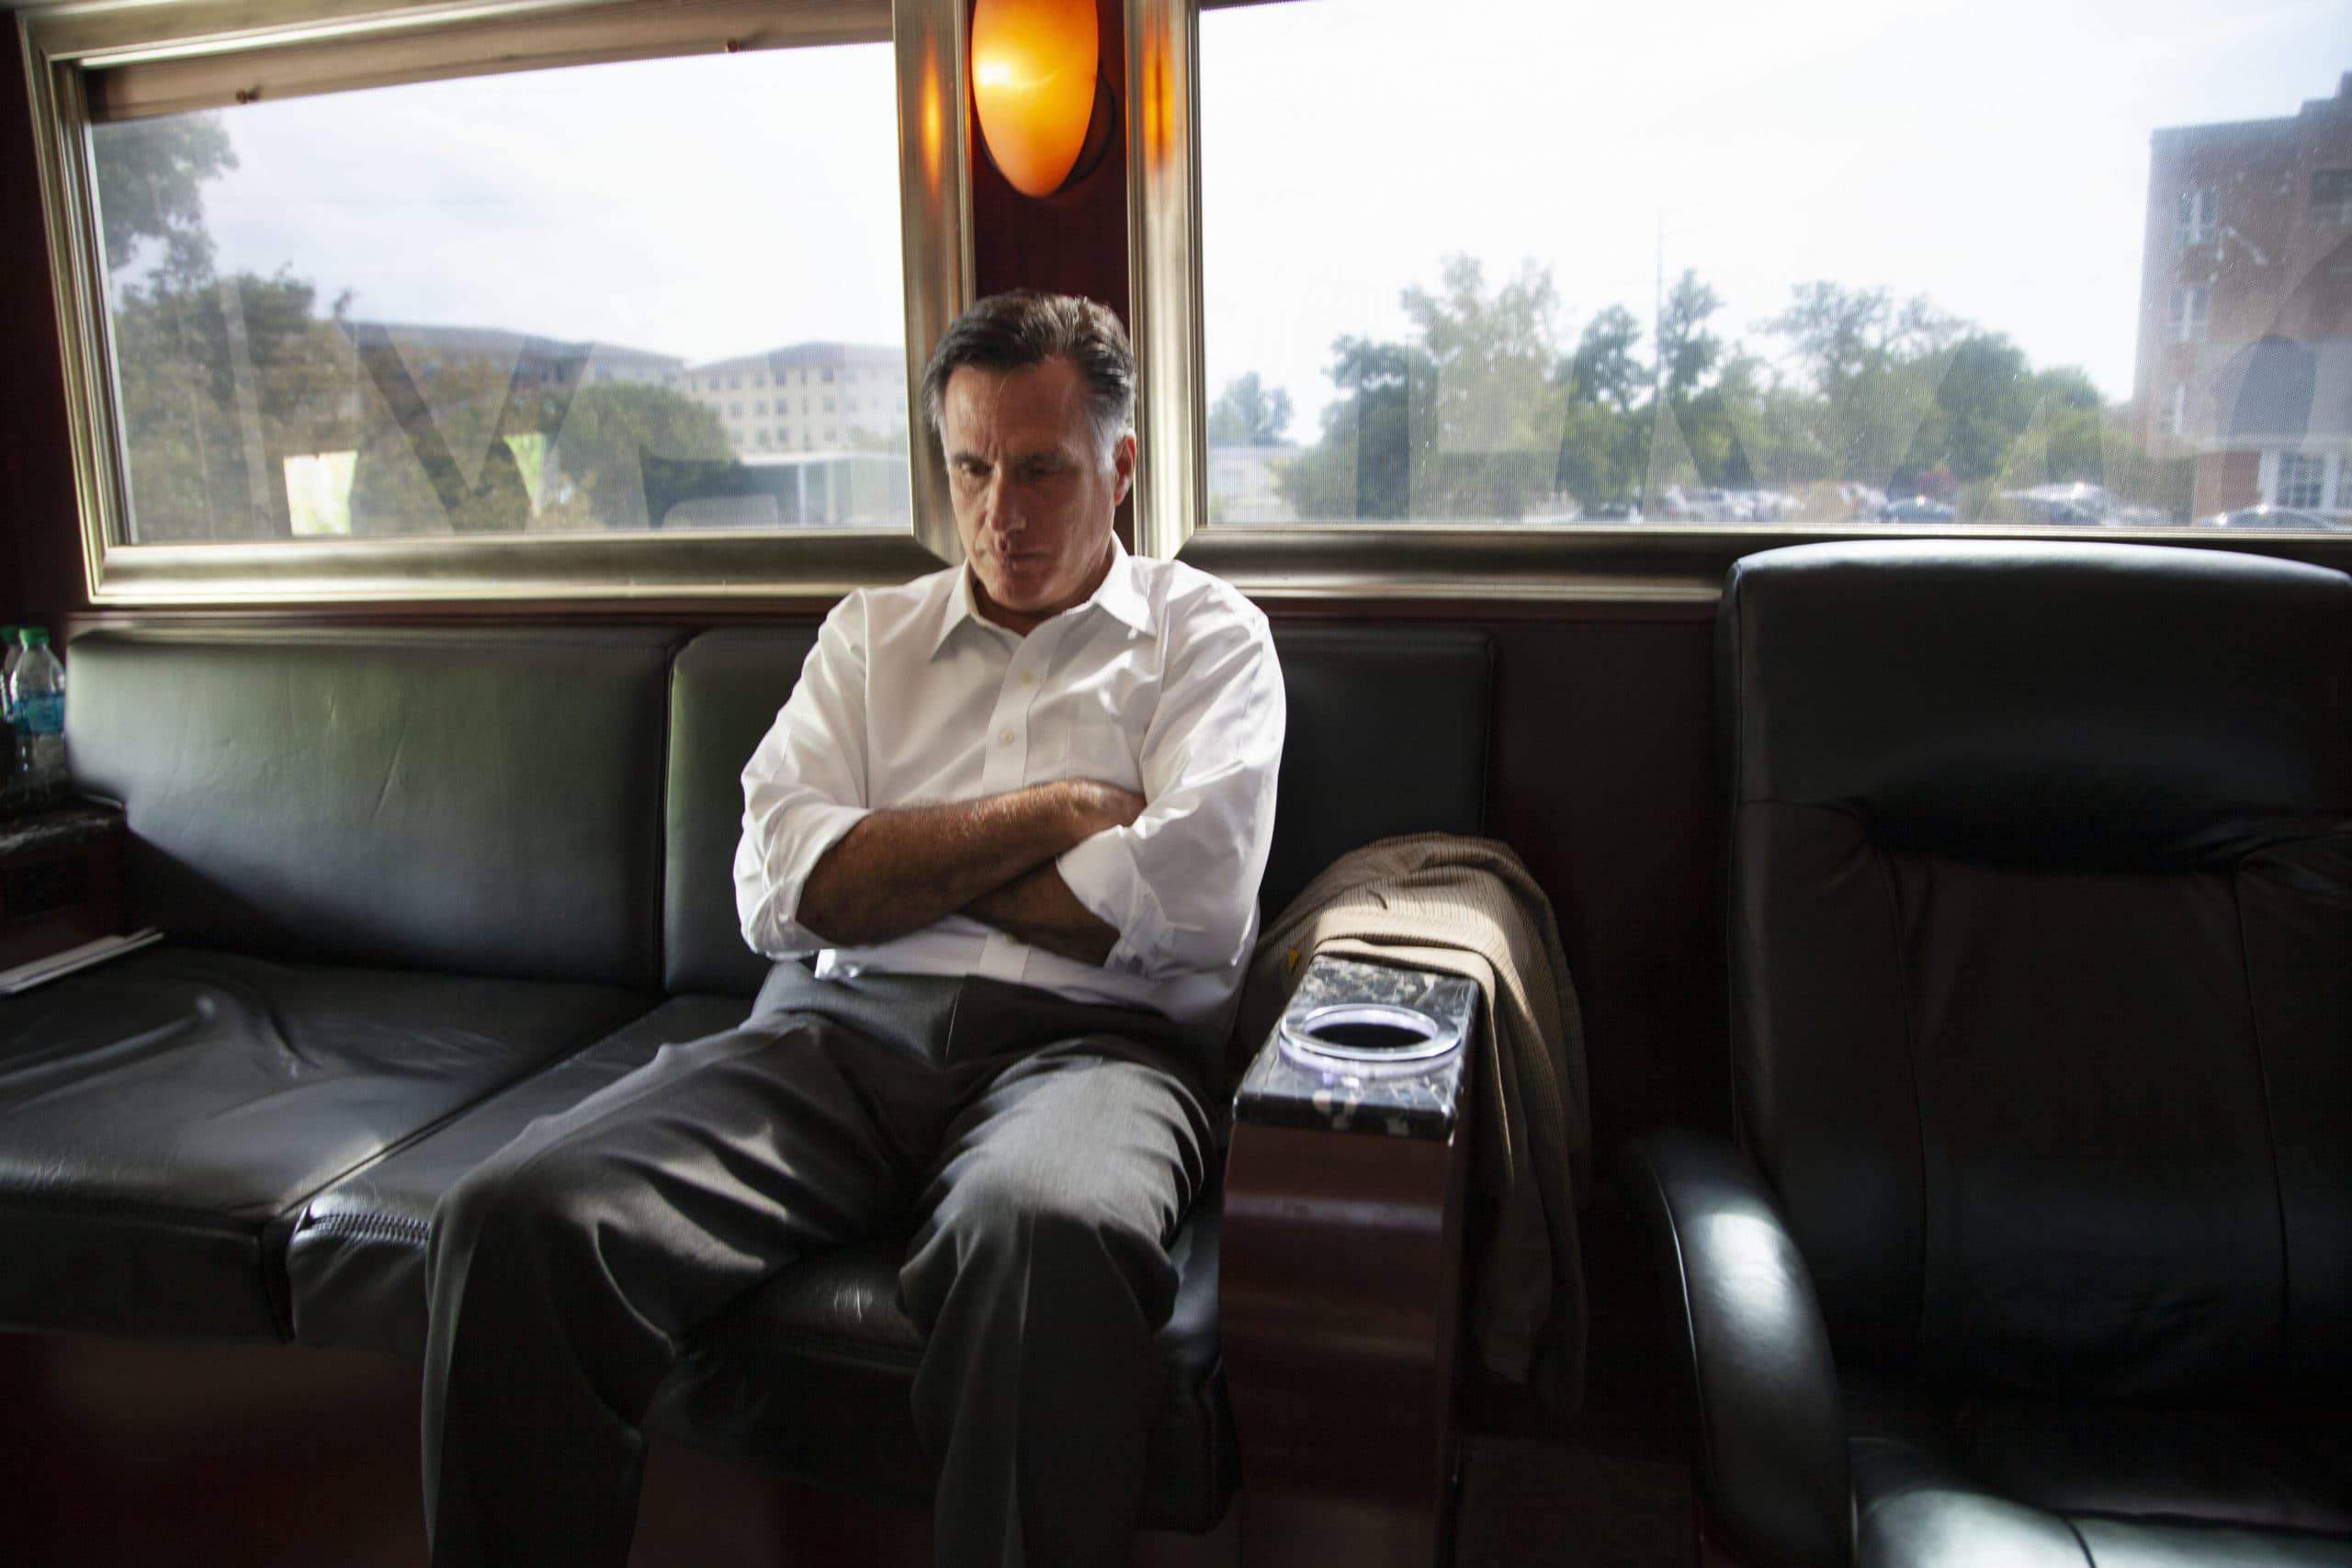 Republican Presidential candidate Mitt Romney in a pensive moment aboard his campaign bus in Ashland, Virginia, August 11, 2012.